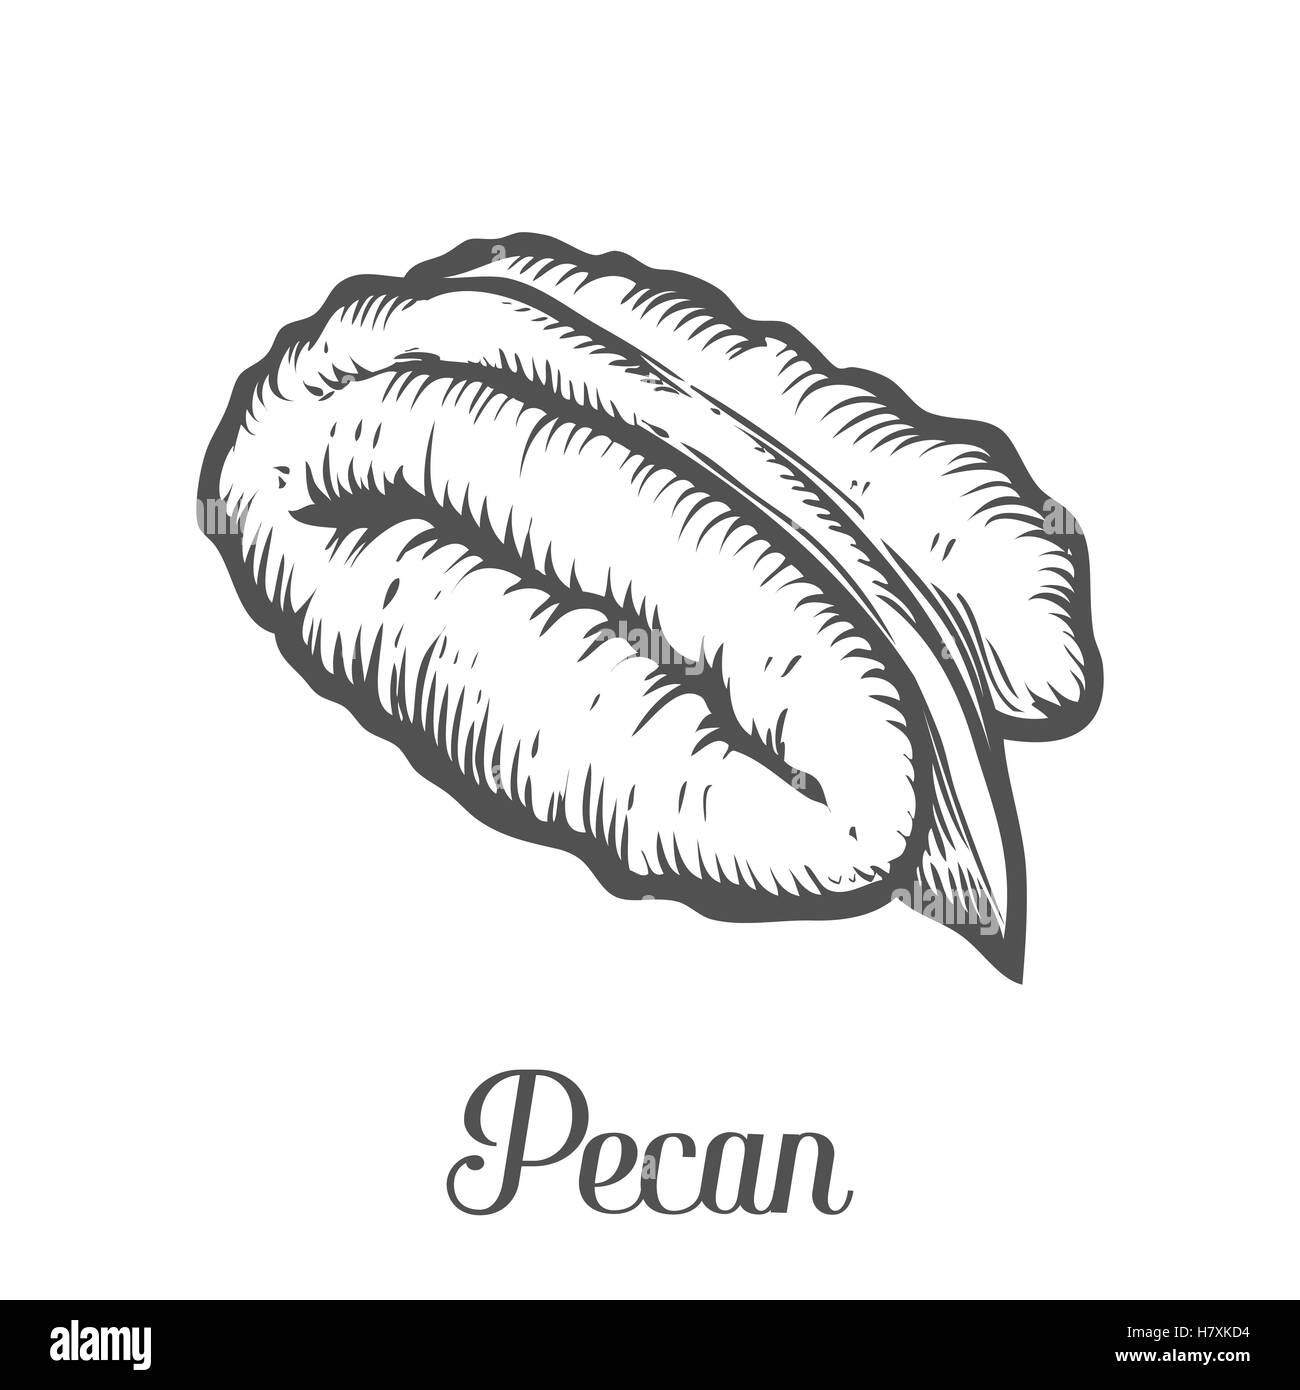 Pecan nut seed vector. Isolated on white background. Pecan butter food ingredient. Engraved hand drawn pecan illustration in ret Stock Vector